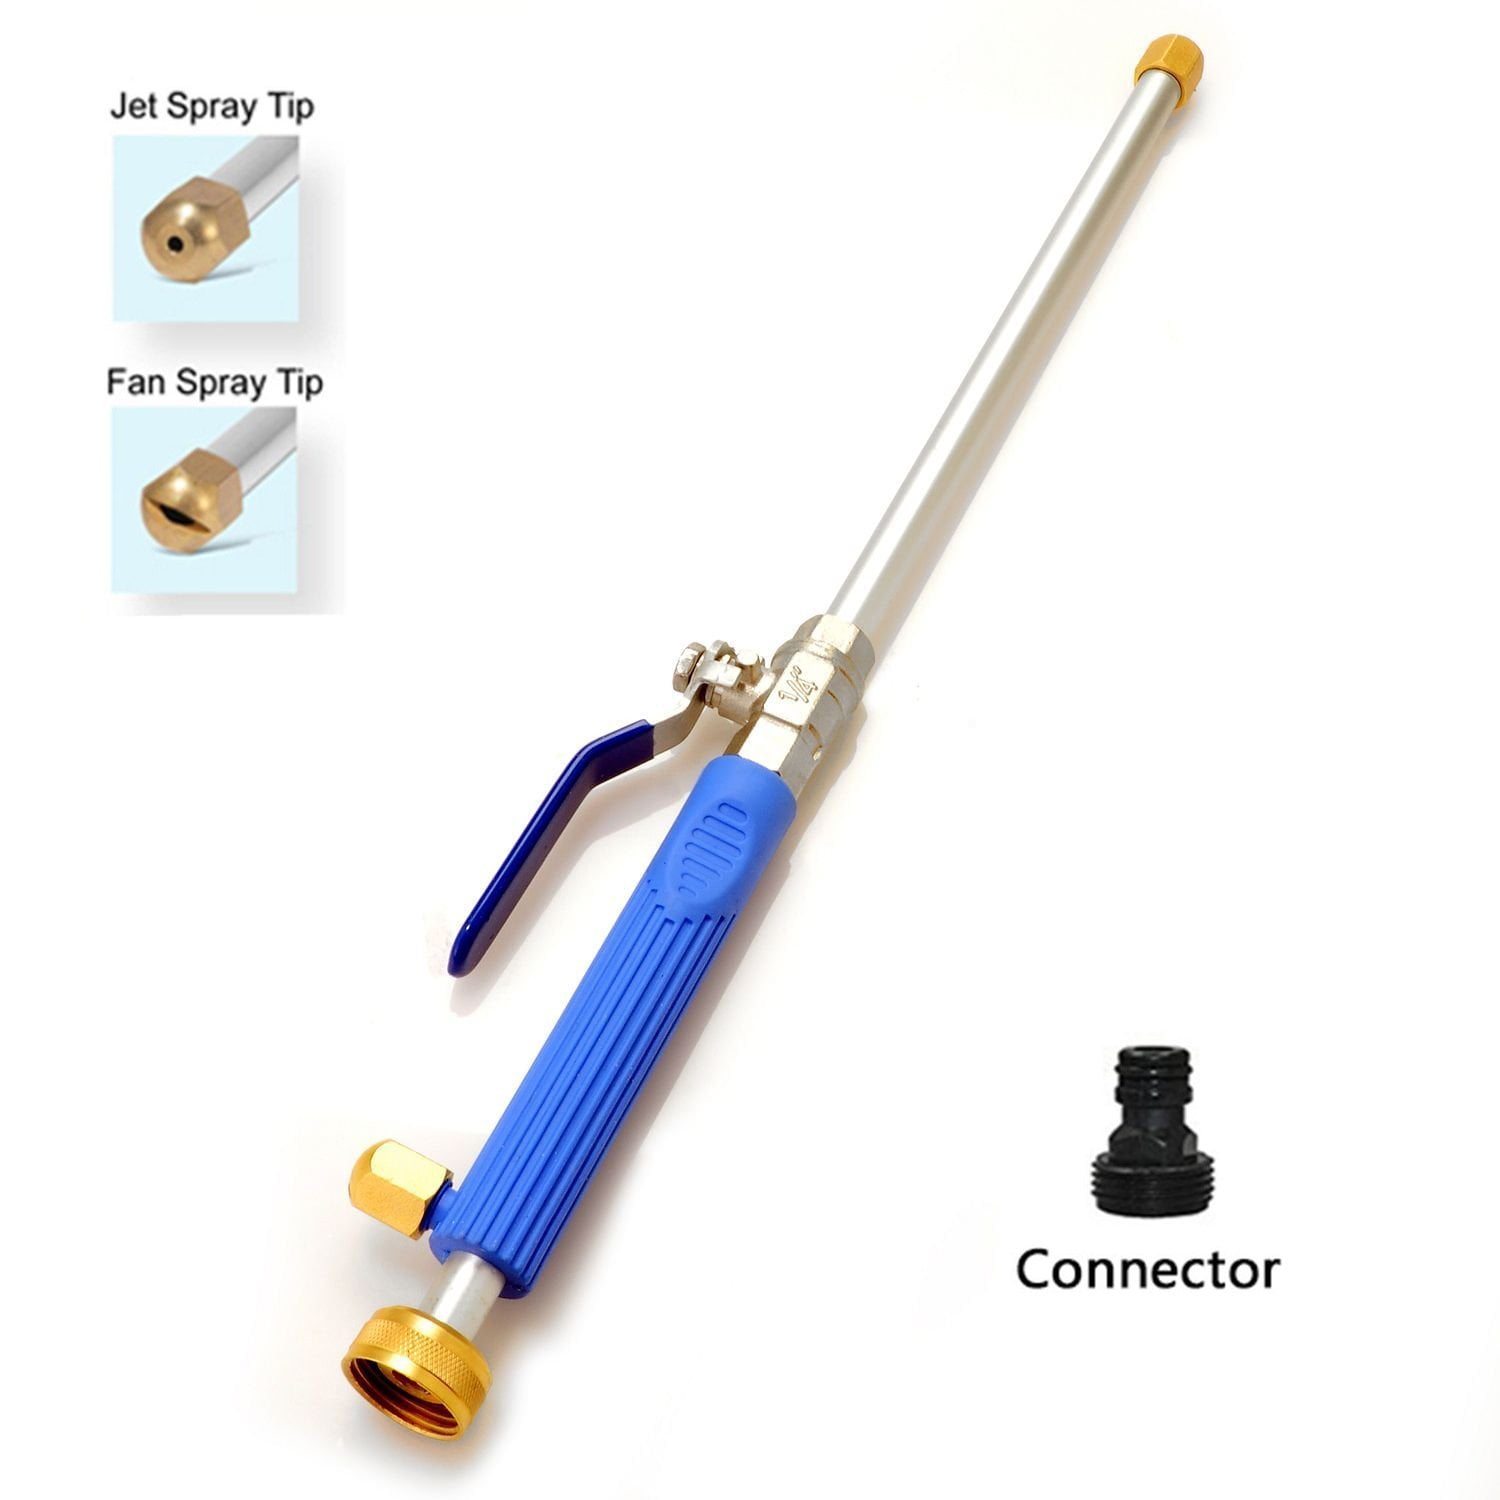 Scrubbing Mitt and Soap Dispenser Round Nozzle + Fan Nozzle Jet Car Washer High Pressure Power Hose Nozzle Wand Glass Window Cleaning Sprayer Extendable Home Garden Car Water Washing 